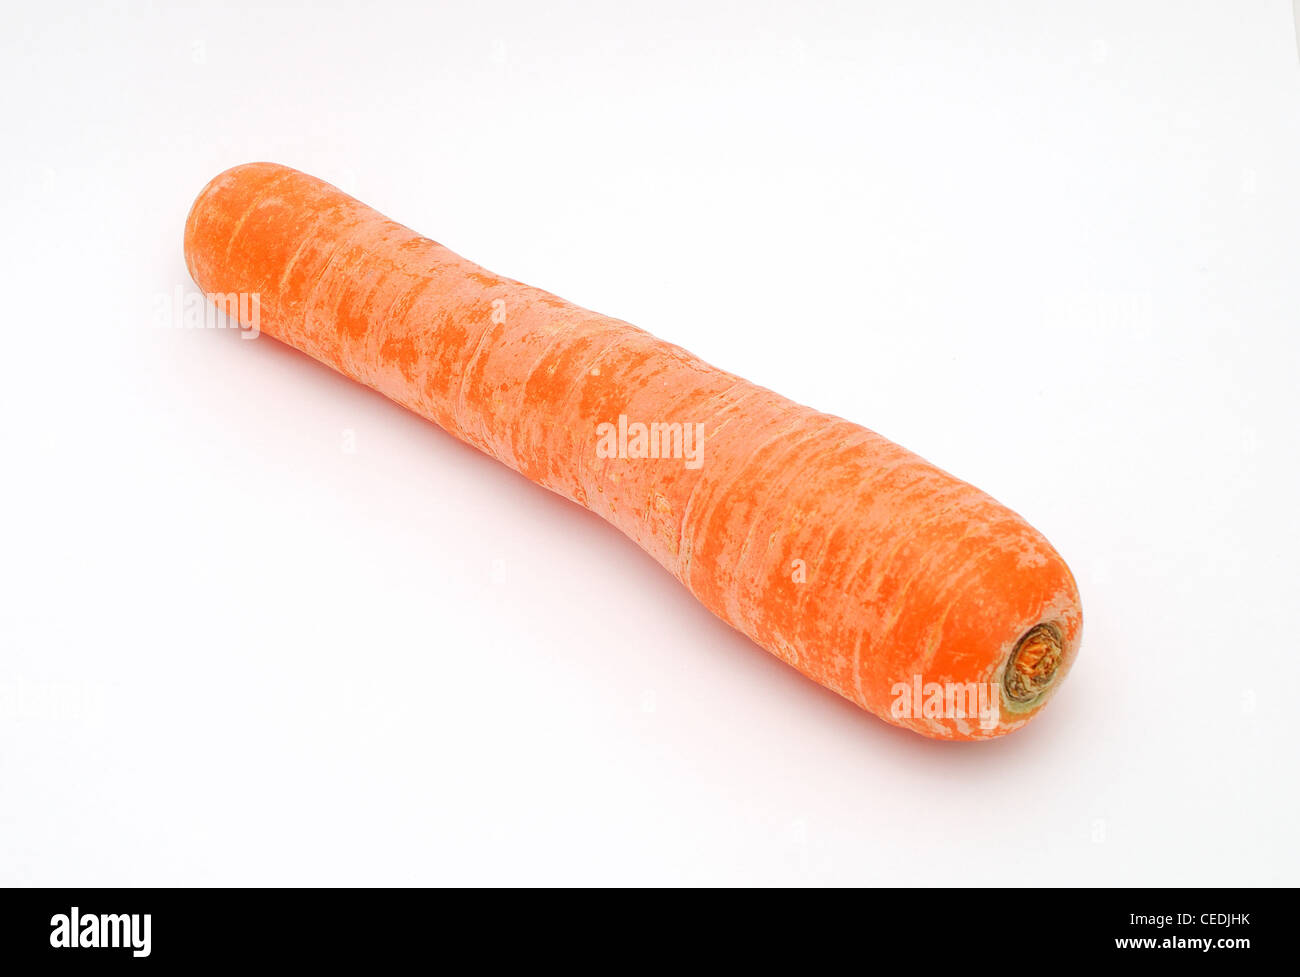 Detail image of one dirty carrot on the white background. Stock Photo